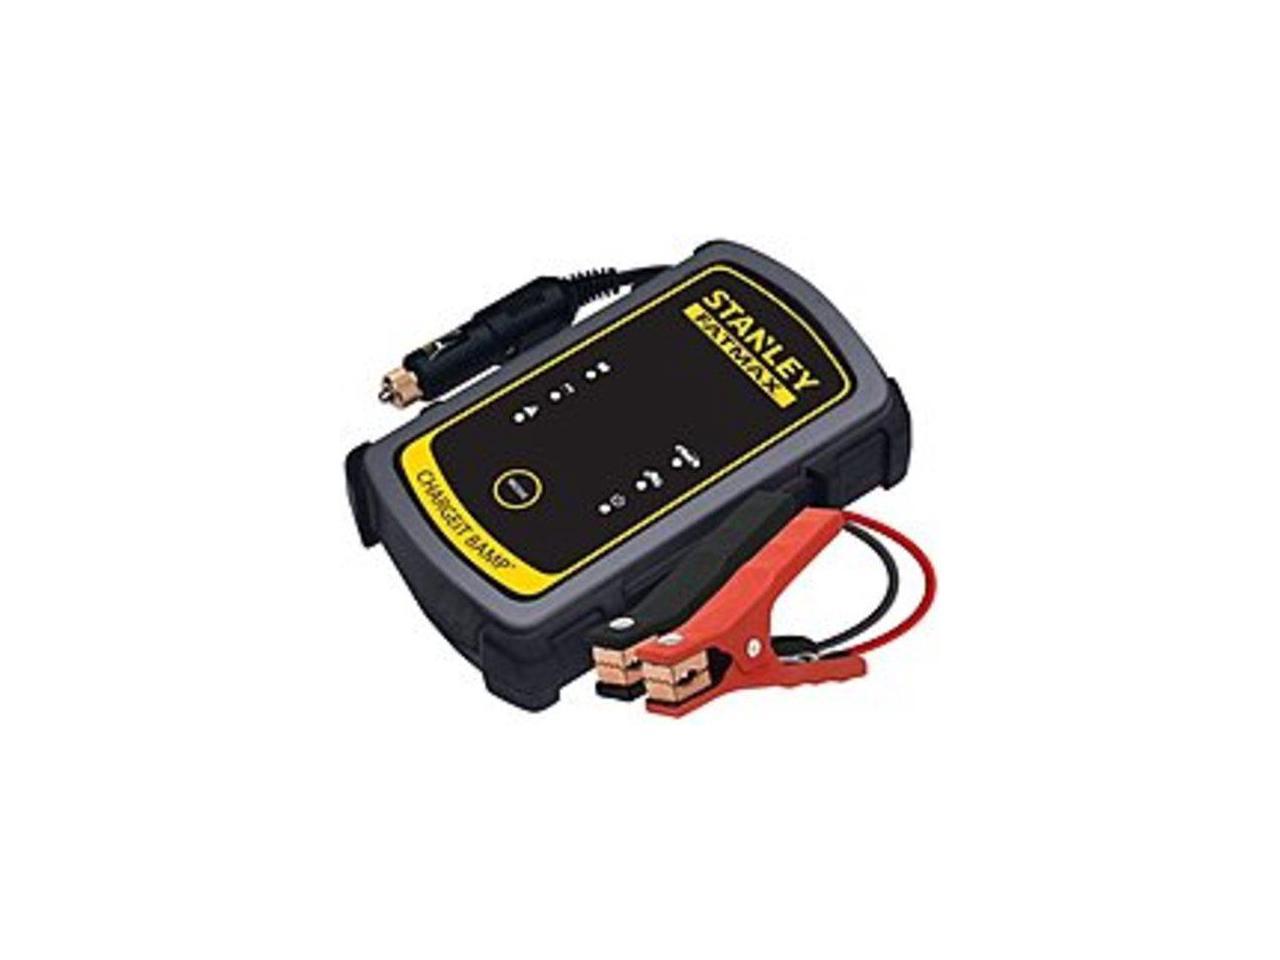 Stanley BC8S 8 Amp Battery Charger/Maintainer - Newegg.com